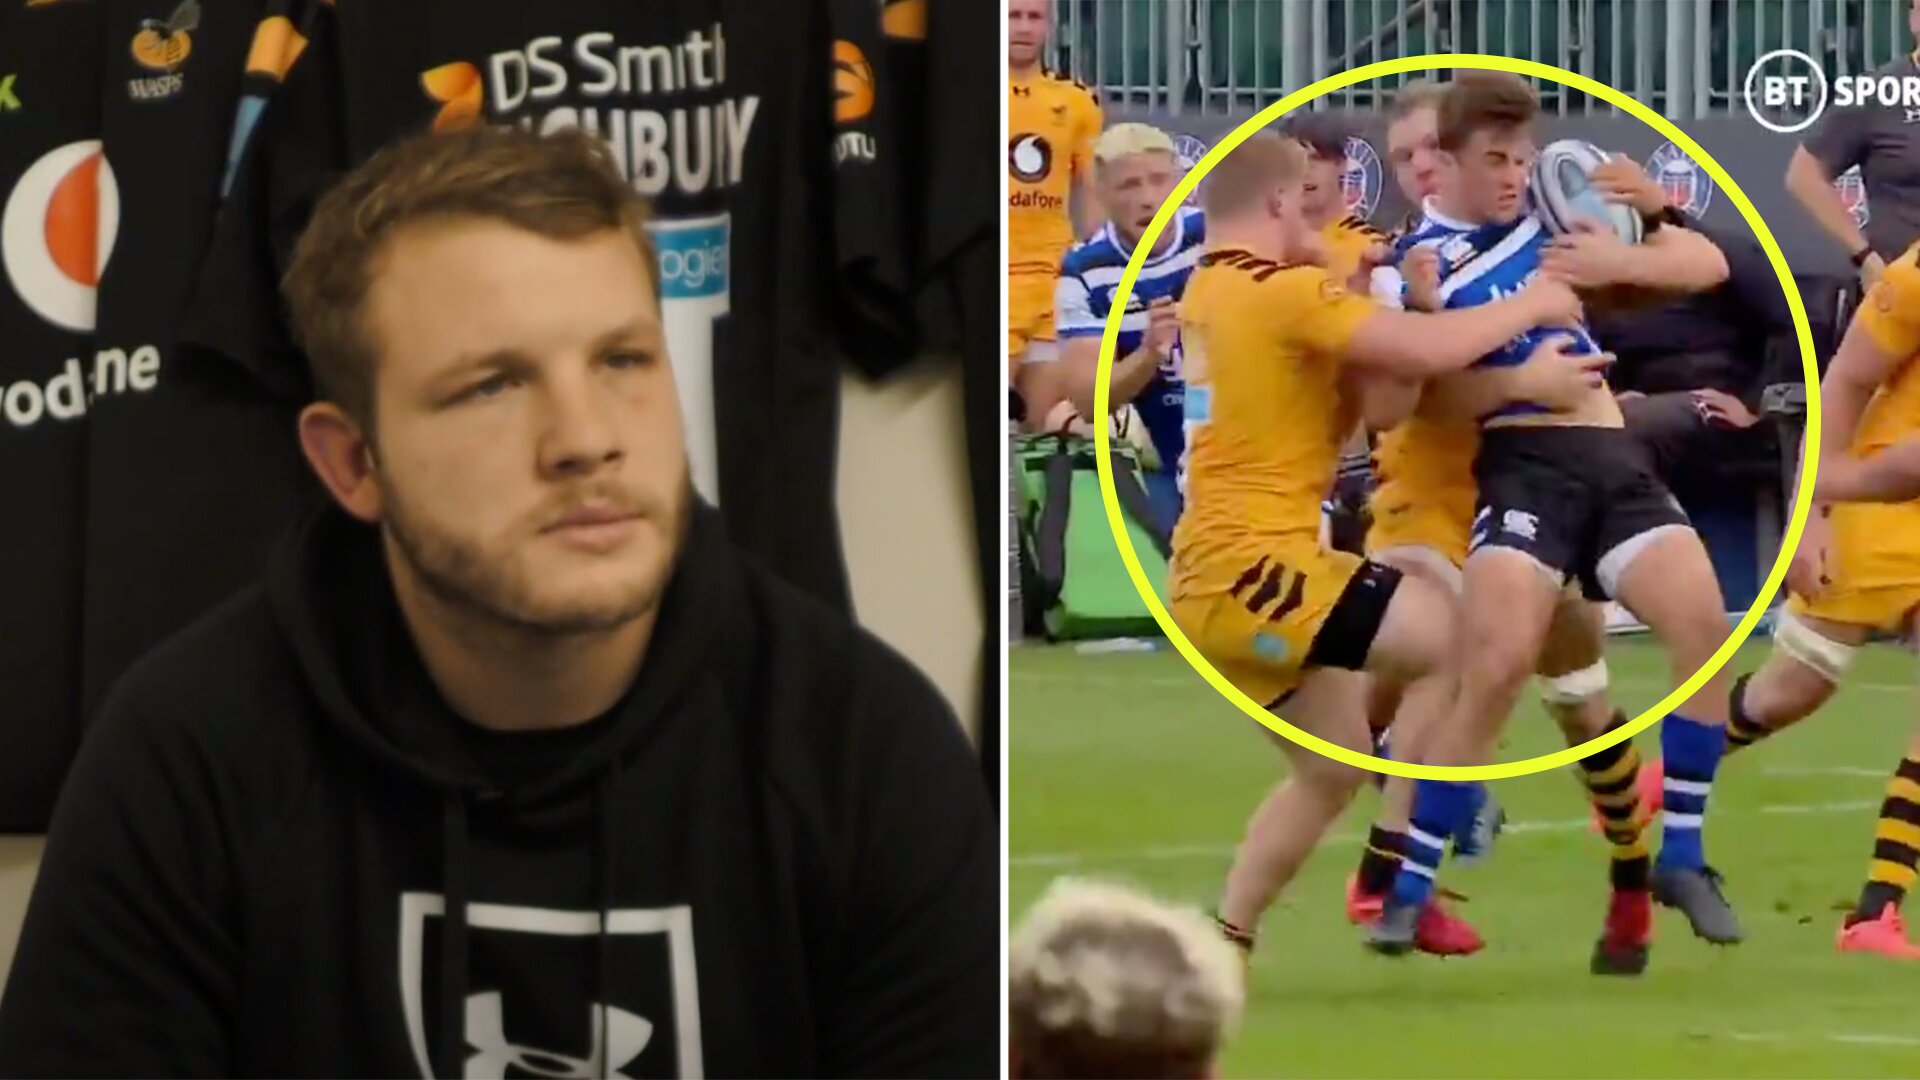 Calls for Joe Launchbury to be banned after brutal manhandling of 20-year-old last weekend